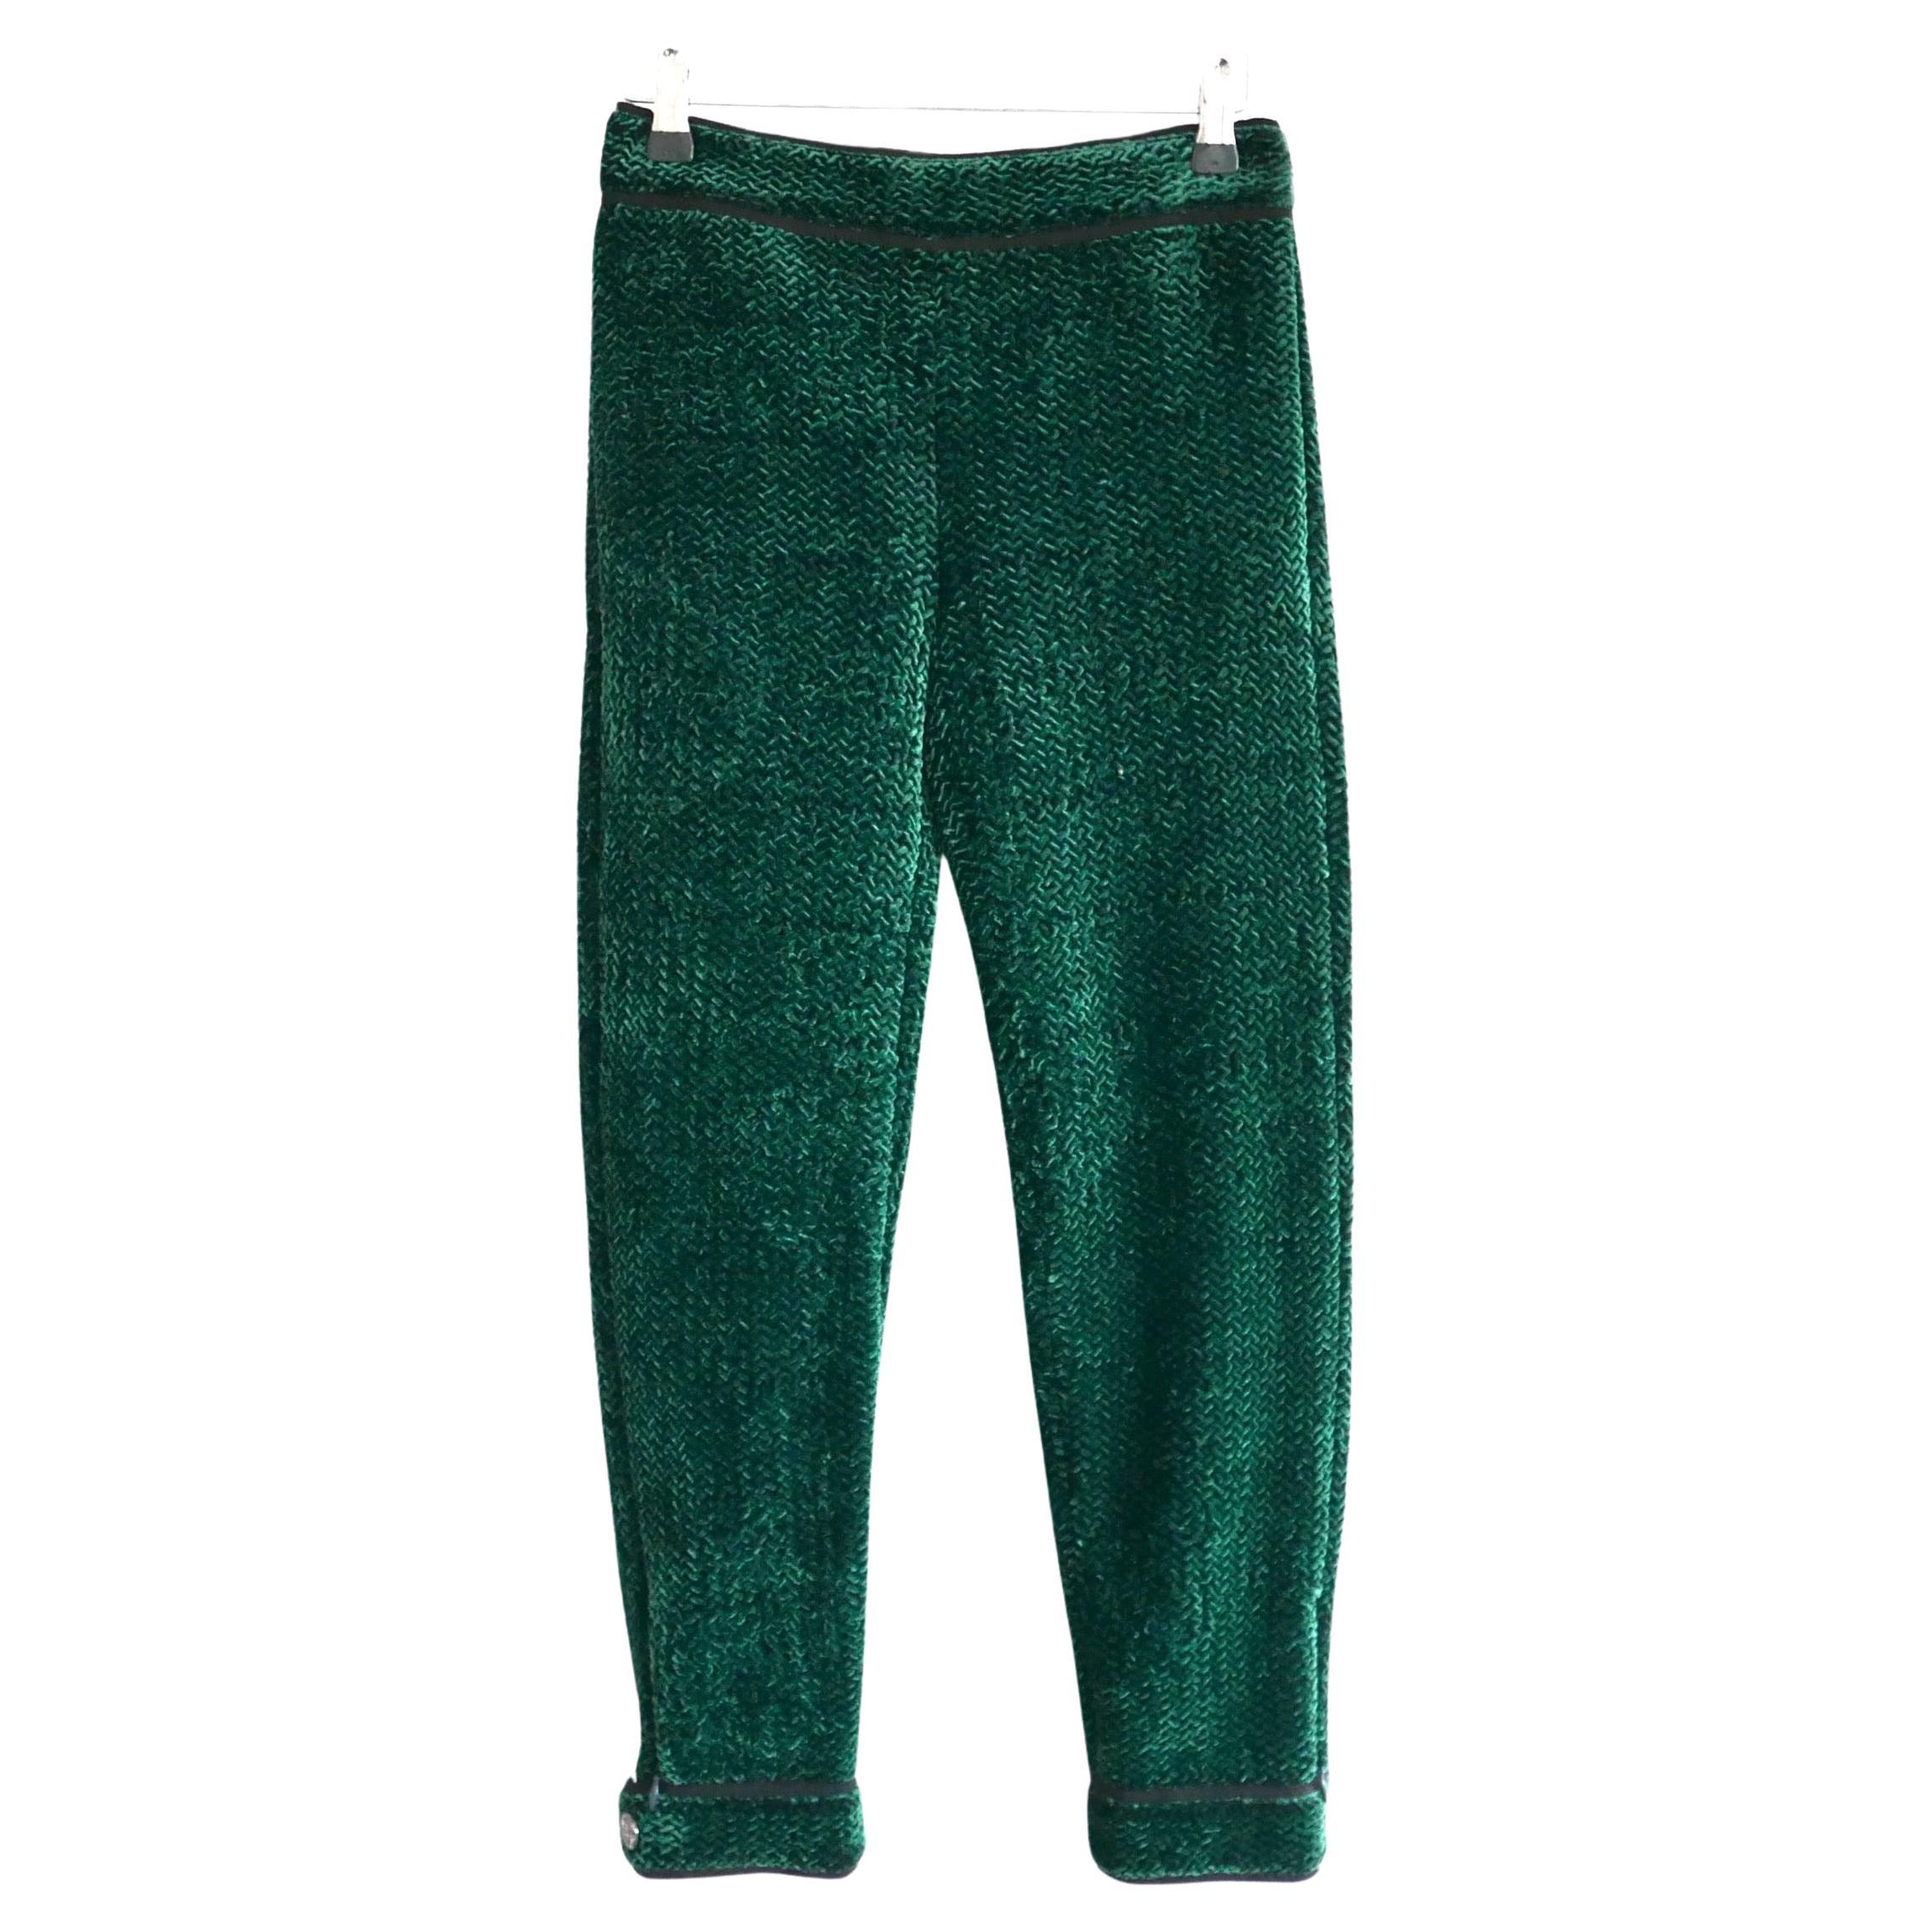 Chanel Fall 2012 Green Textured Velvet Pedal Pushers Trousers For Sale